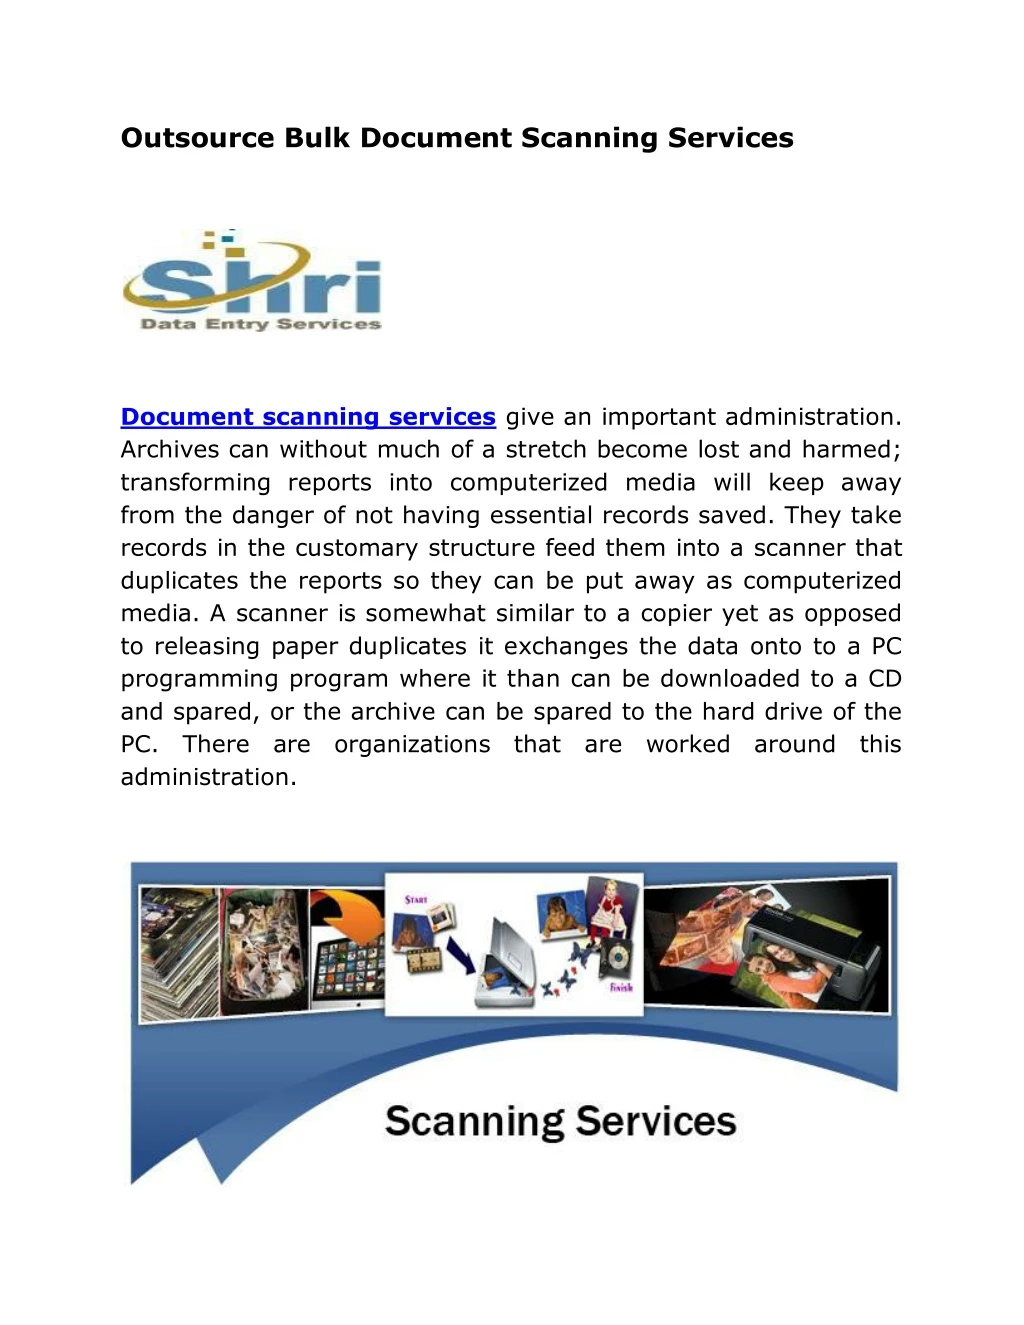 outsource bulk document scanning services